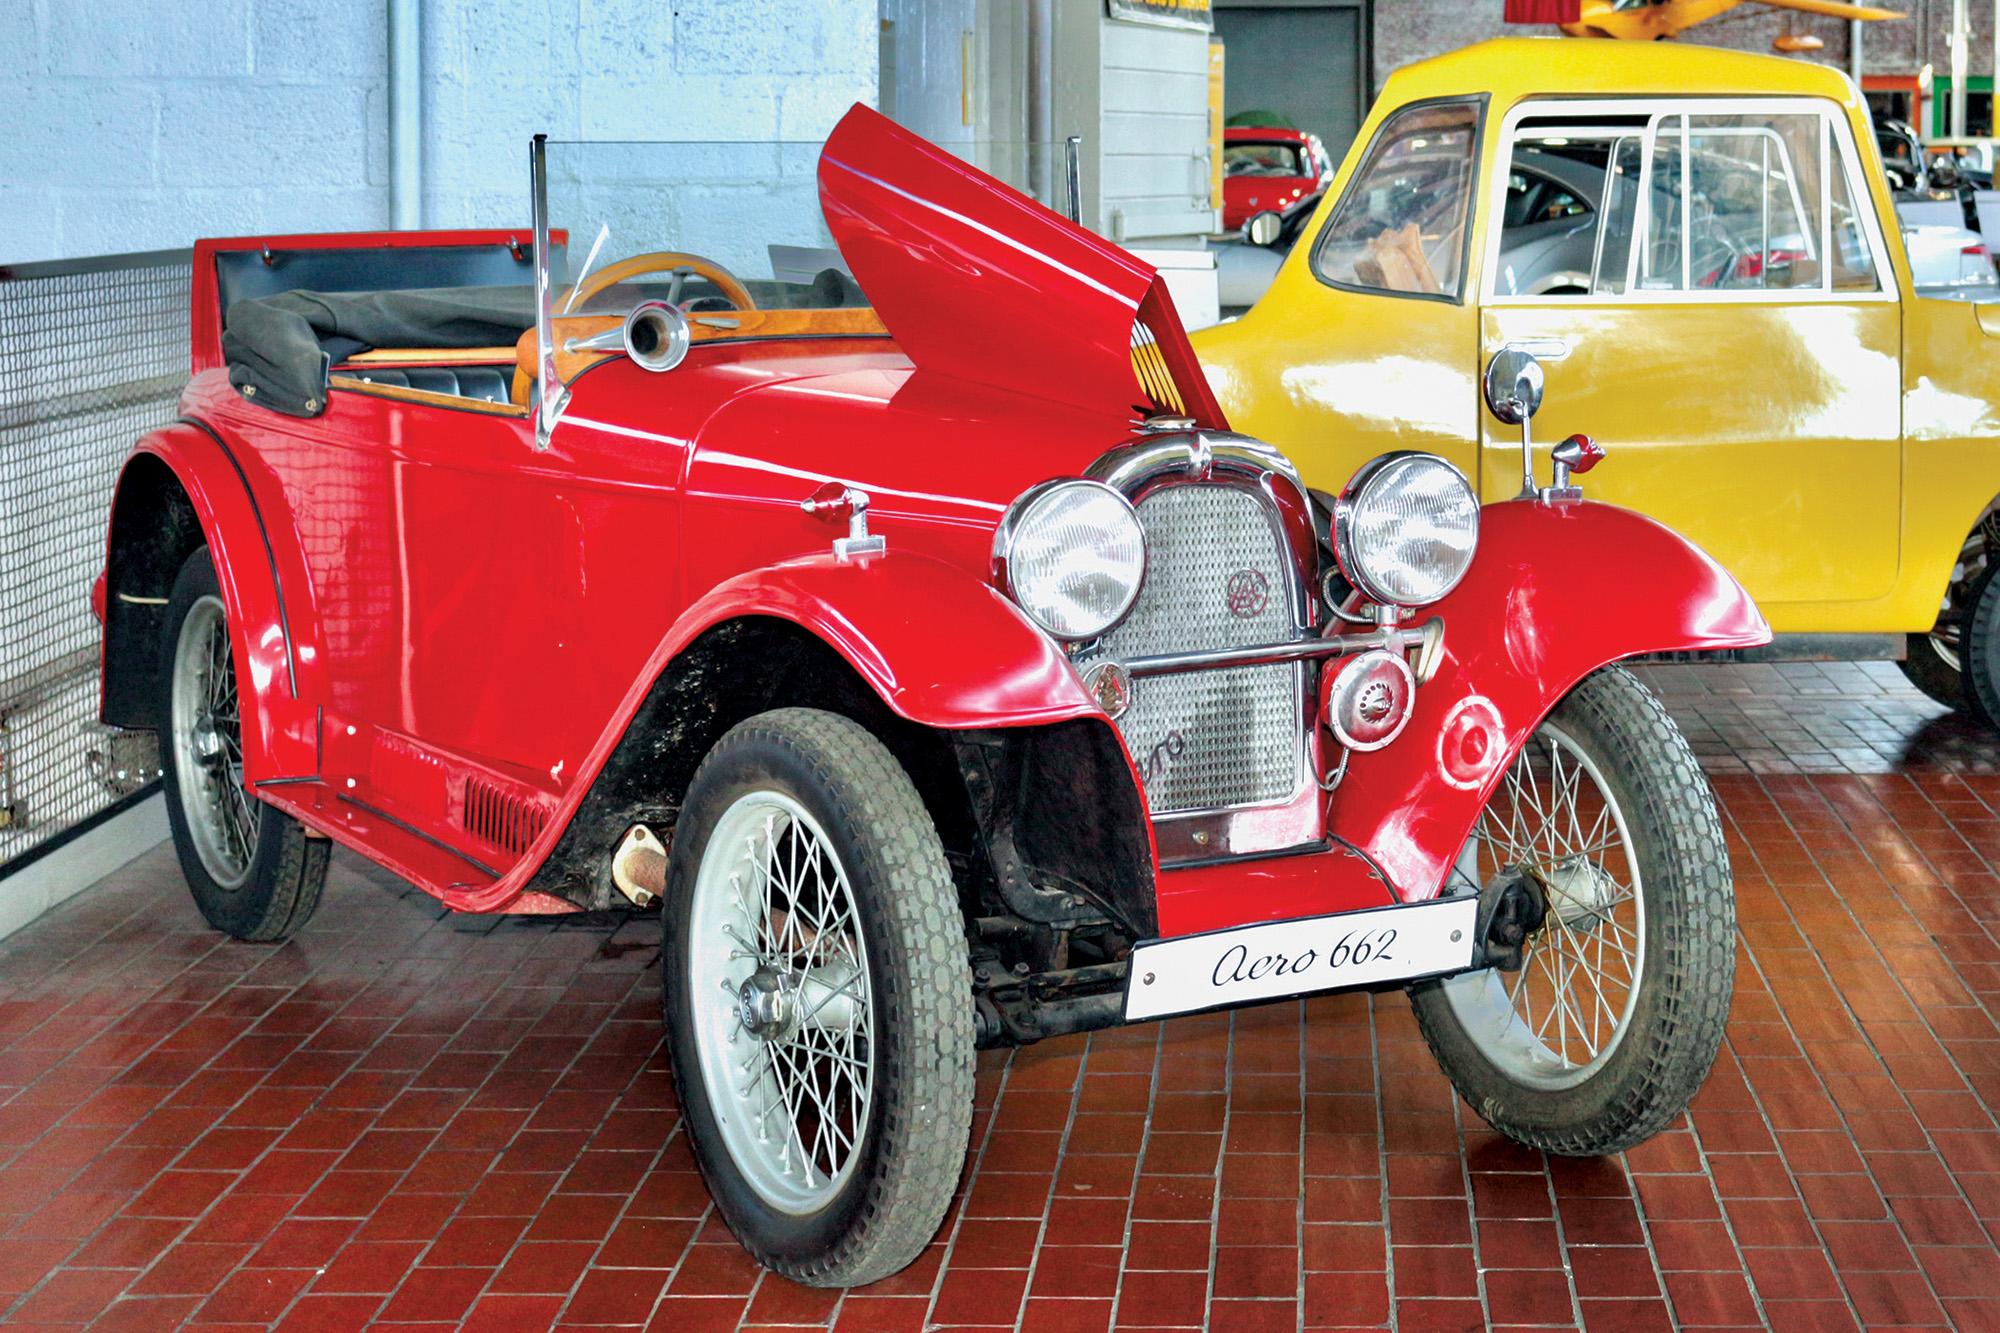 Not many museums highlight Czech-built marques. We visit three of them